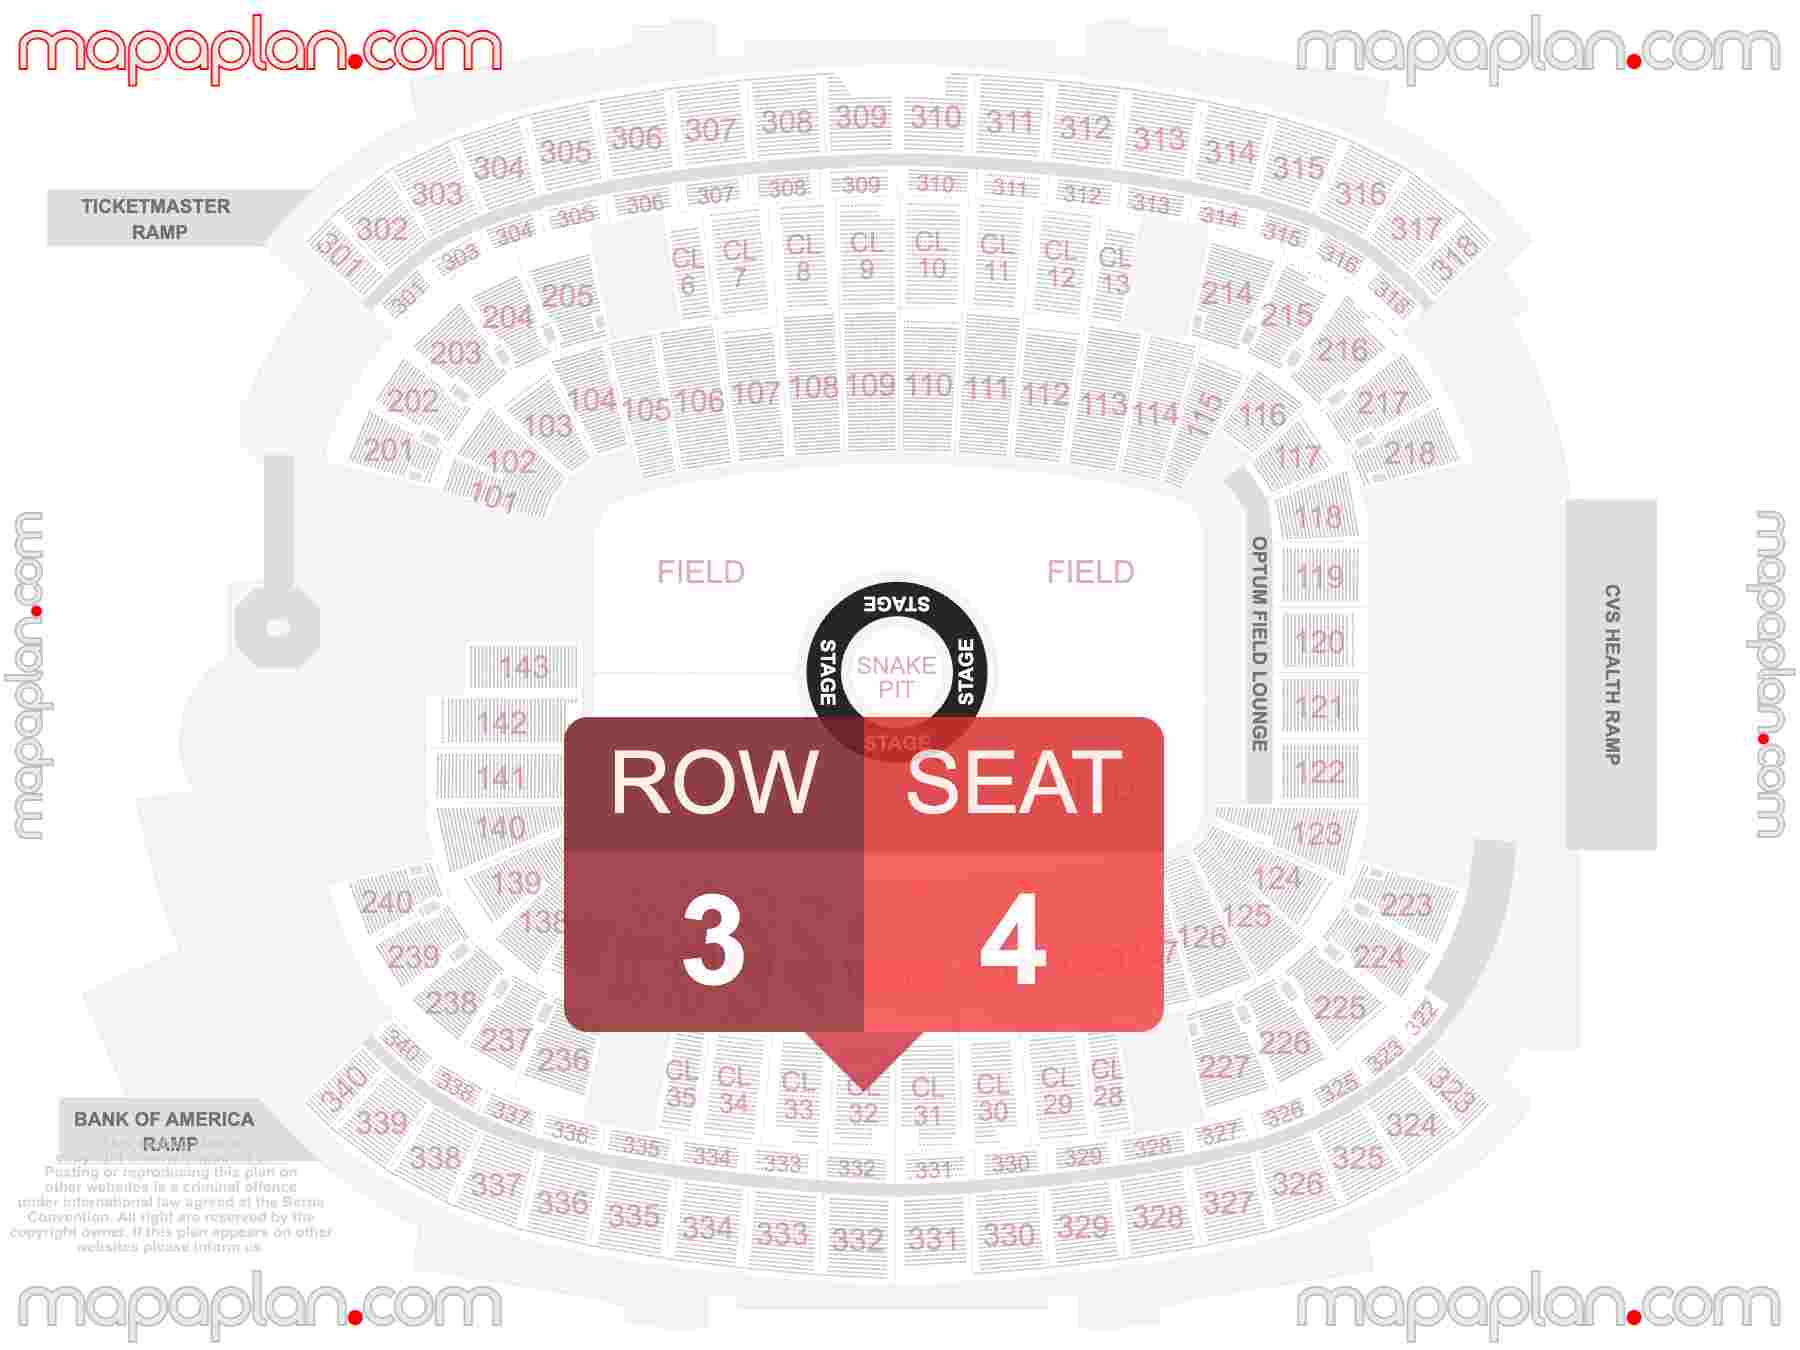 Foxborough Gillette Stadium seating chart Concert 360 in the round stage seating chart with exact section numbers showing best rows and seats selection 3d layout - Best interactive seat finder tool with precise detailed location data